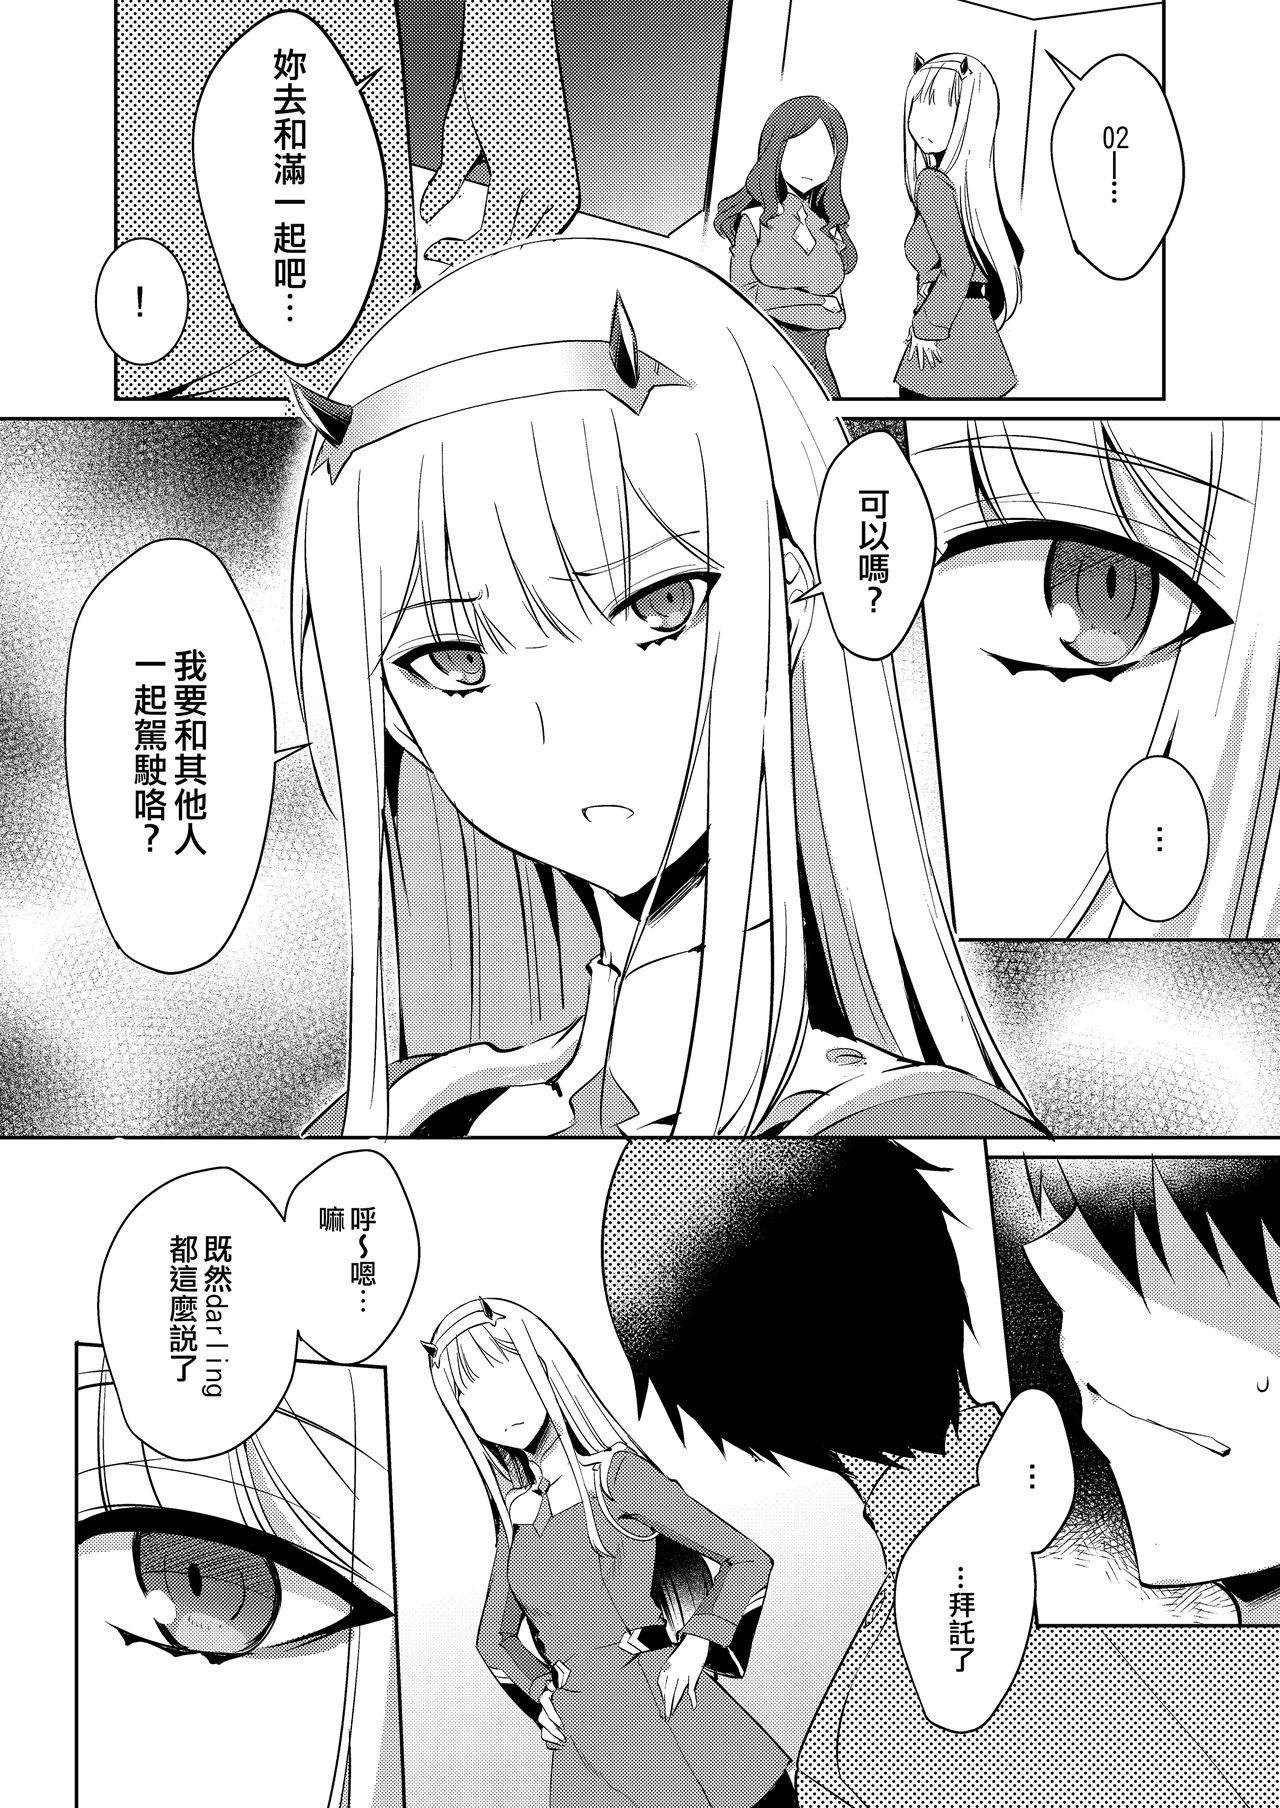 Class Room Mitsuru in the Zero Two - Darling in the franxx Amateur Sex - Page 5